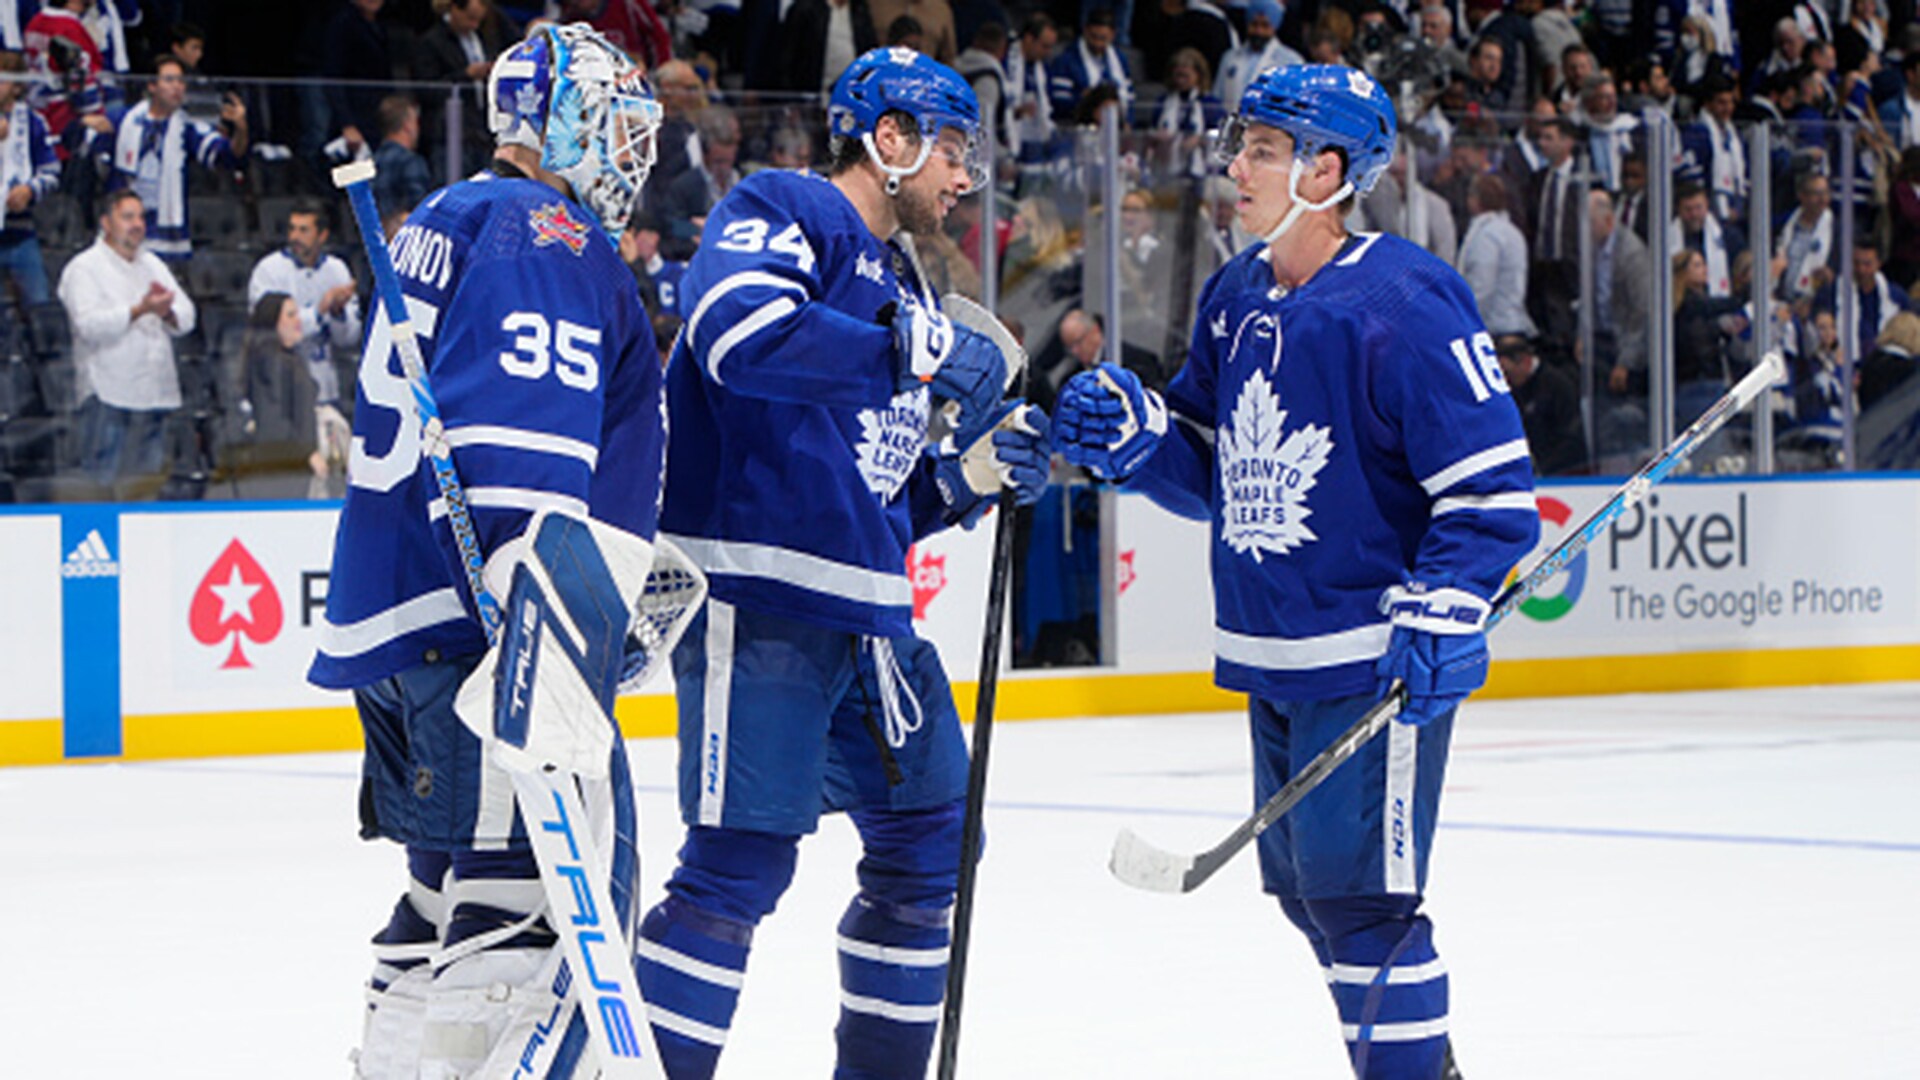 Toronto Maple Leafs hoping to climb out of 0-2 hole